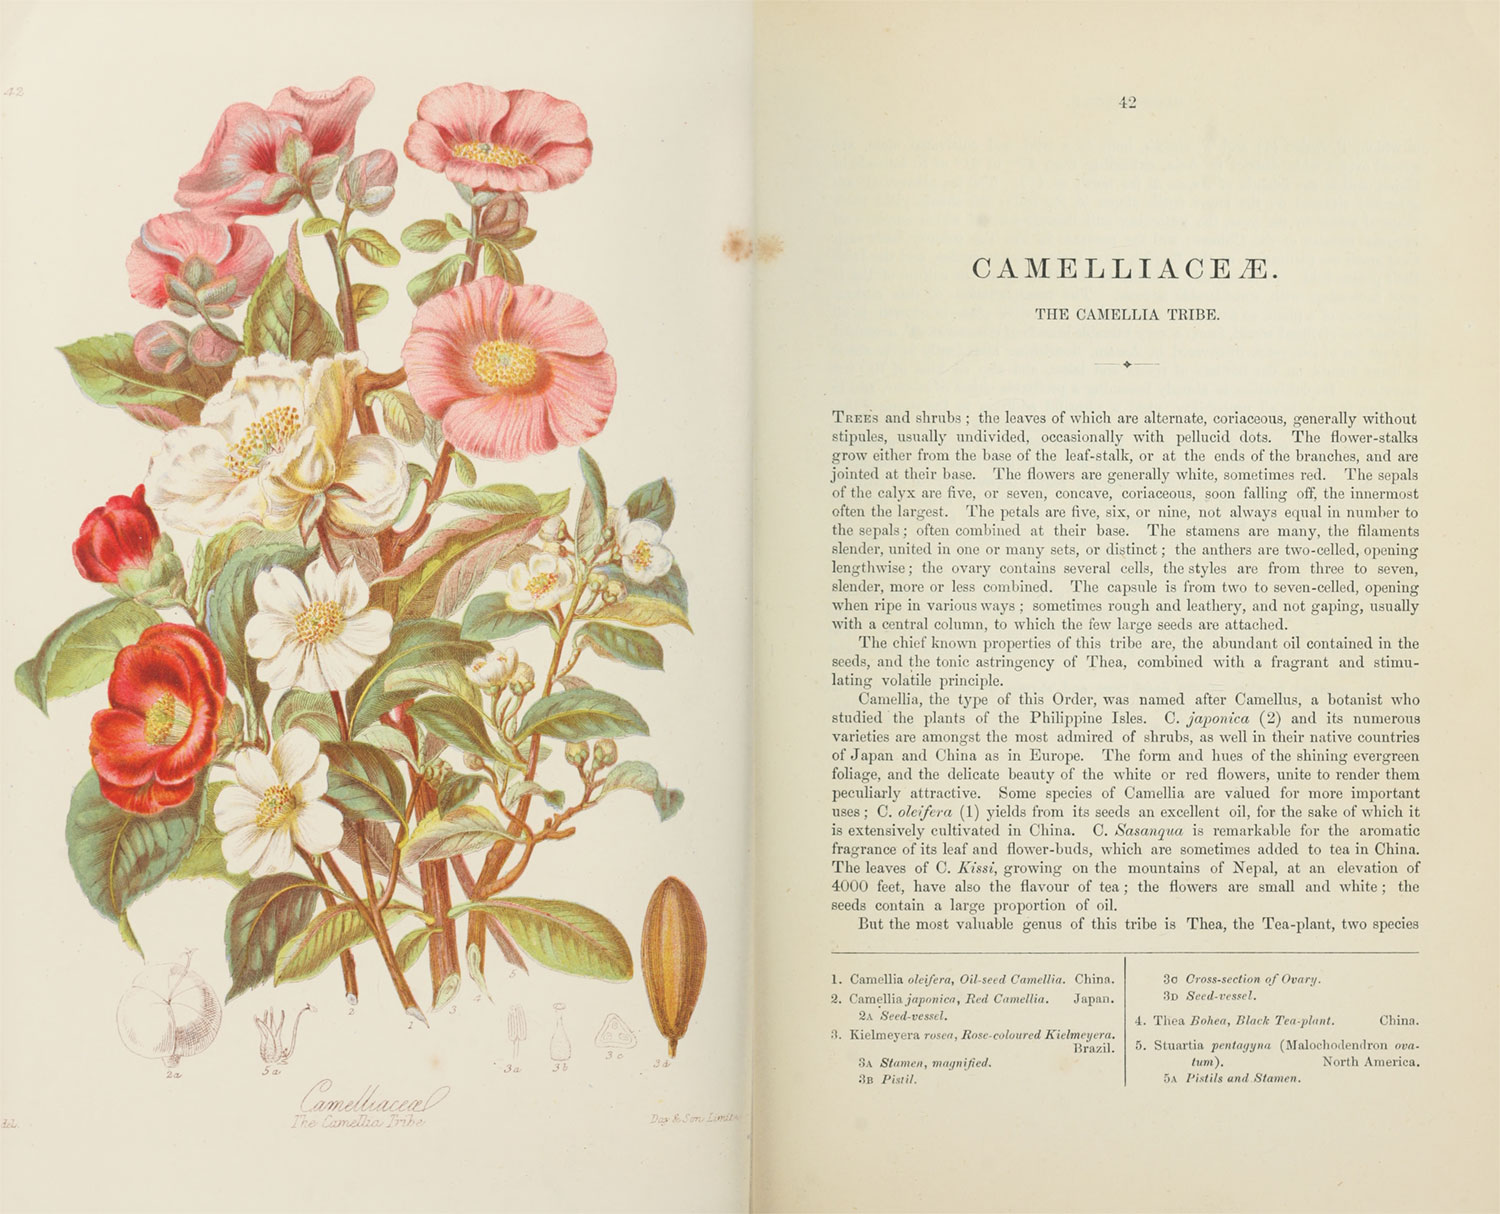 Page spread of scans of the original illustration (left) and first page of description (right) of the camellia tribe